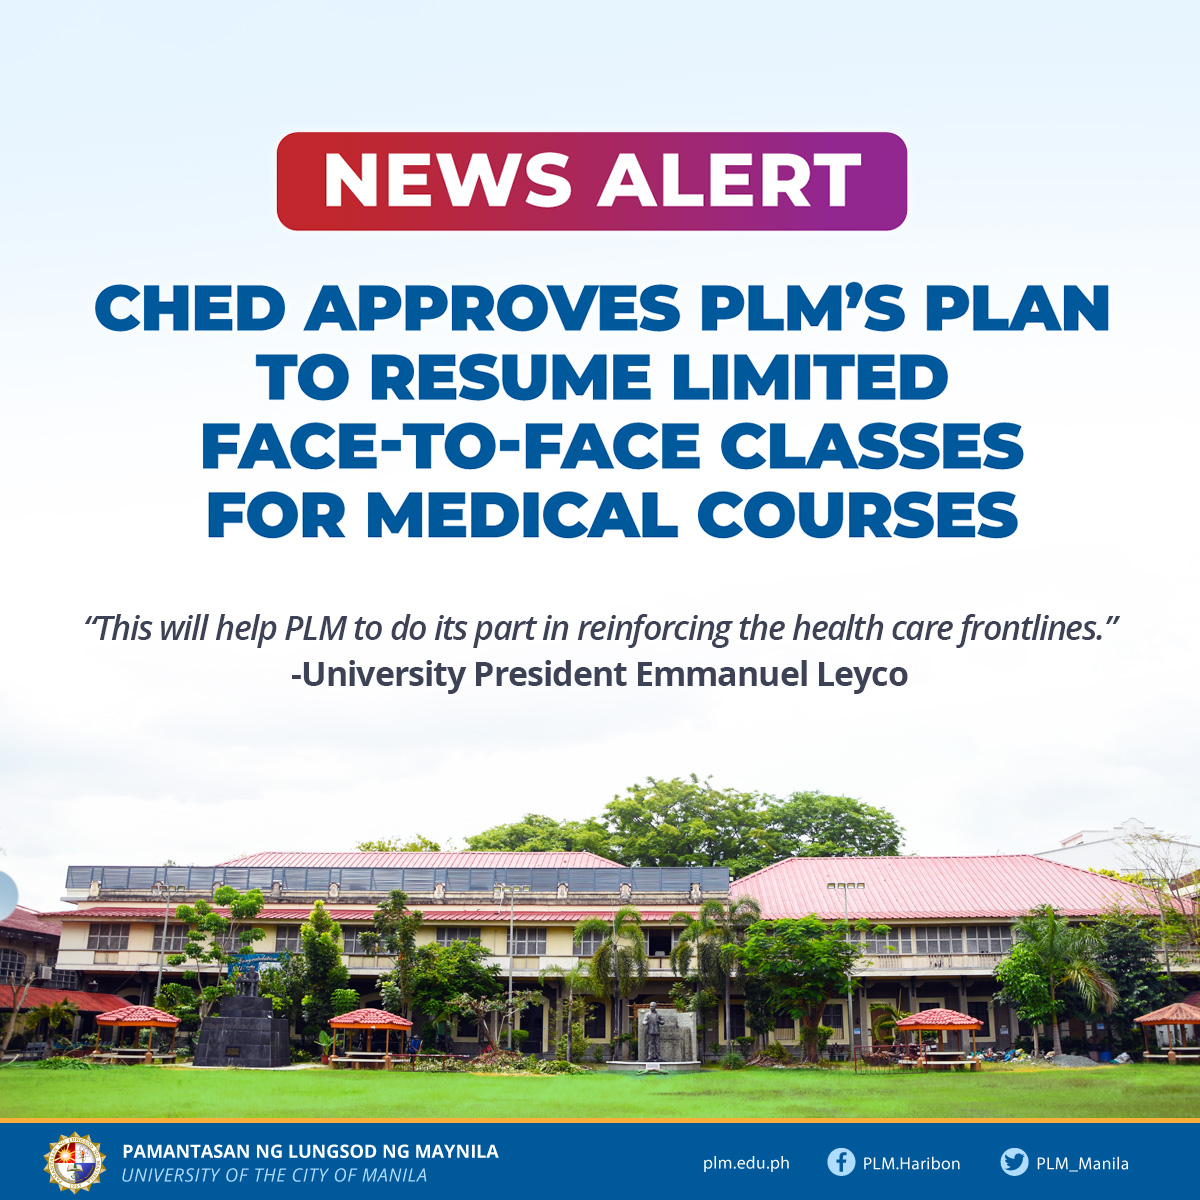 CHED approves PLM’s plan to resume limited face-to-face classes for medical courses